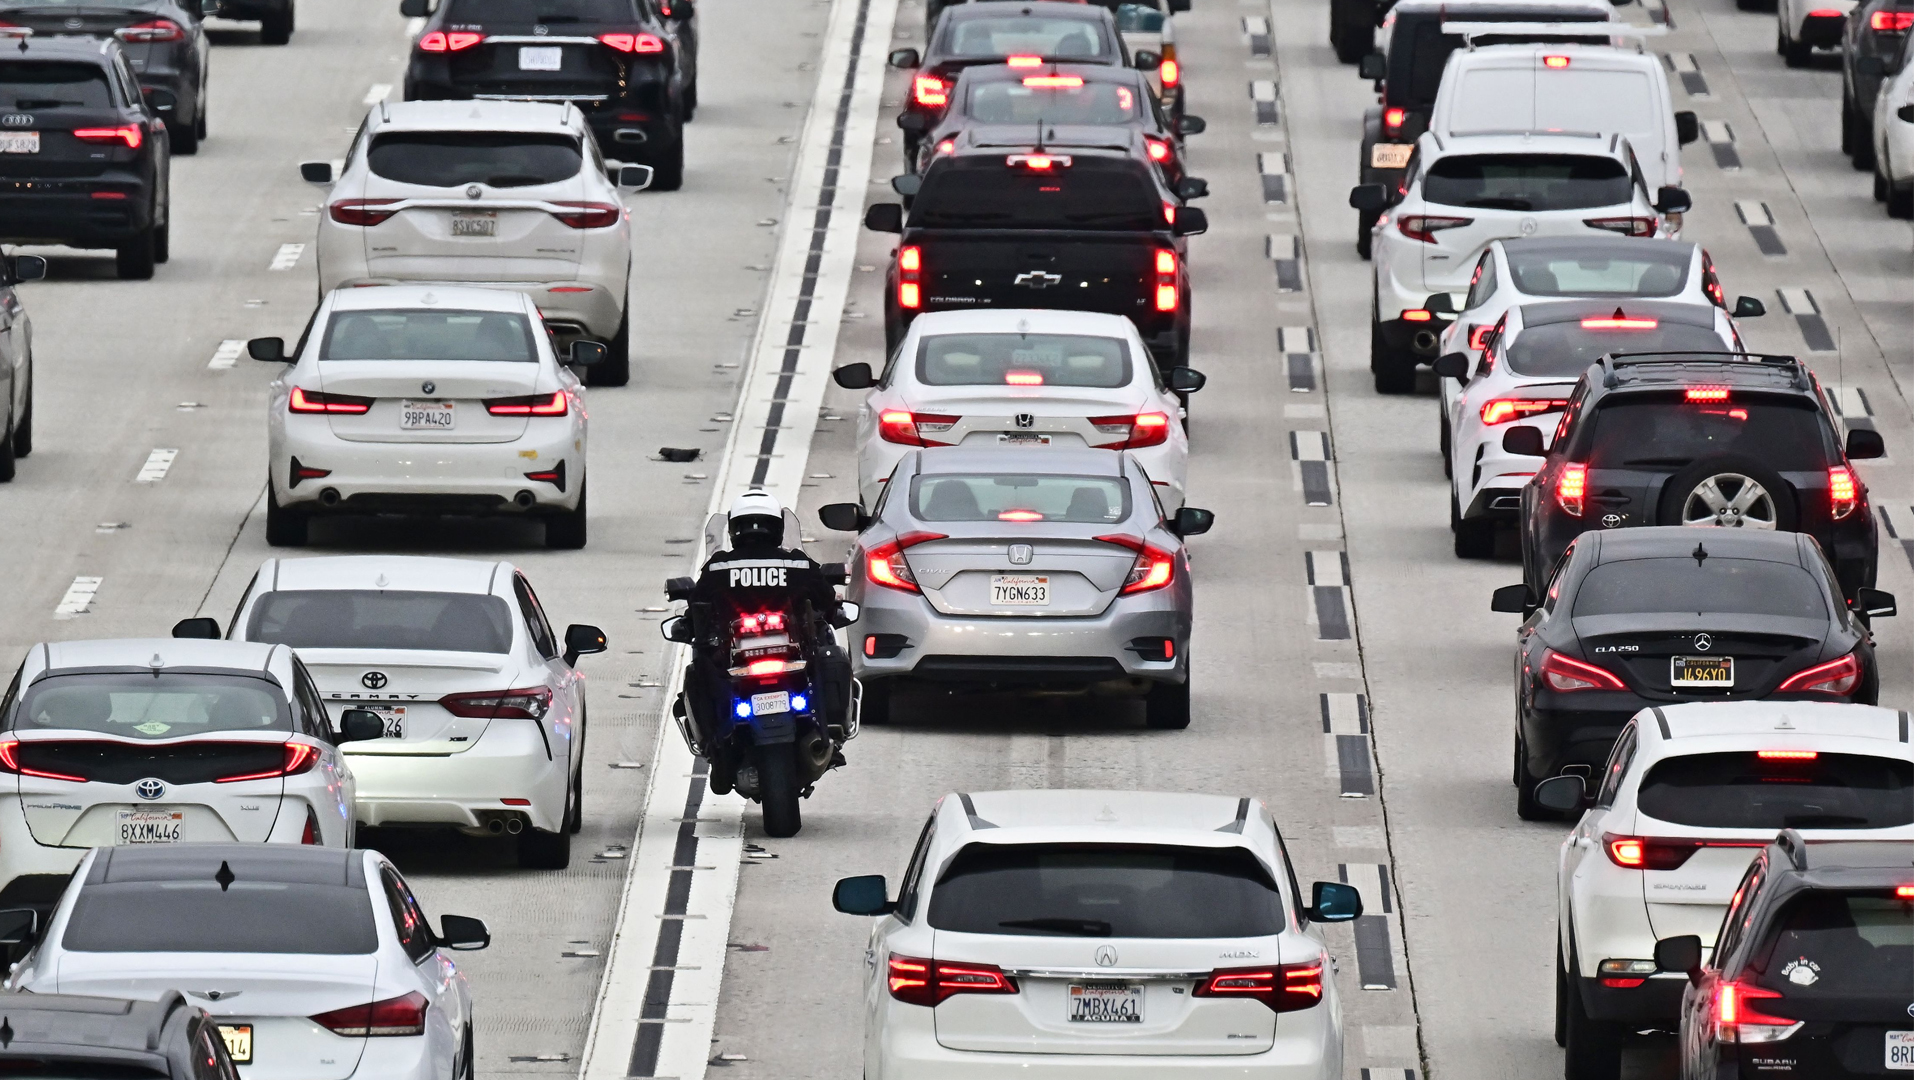 Do You Let Traffic Dictate Your Driving Plans?